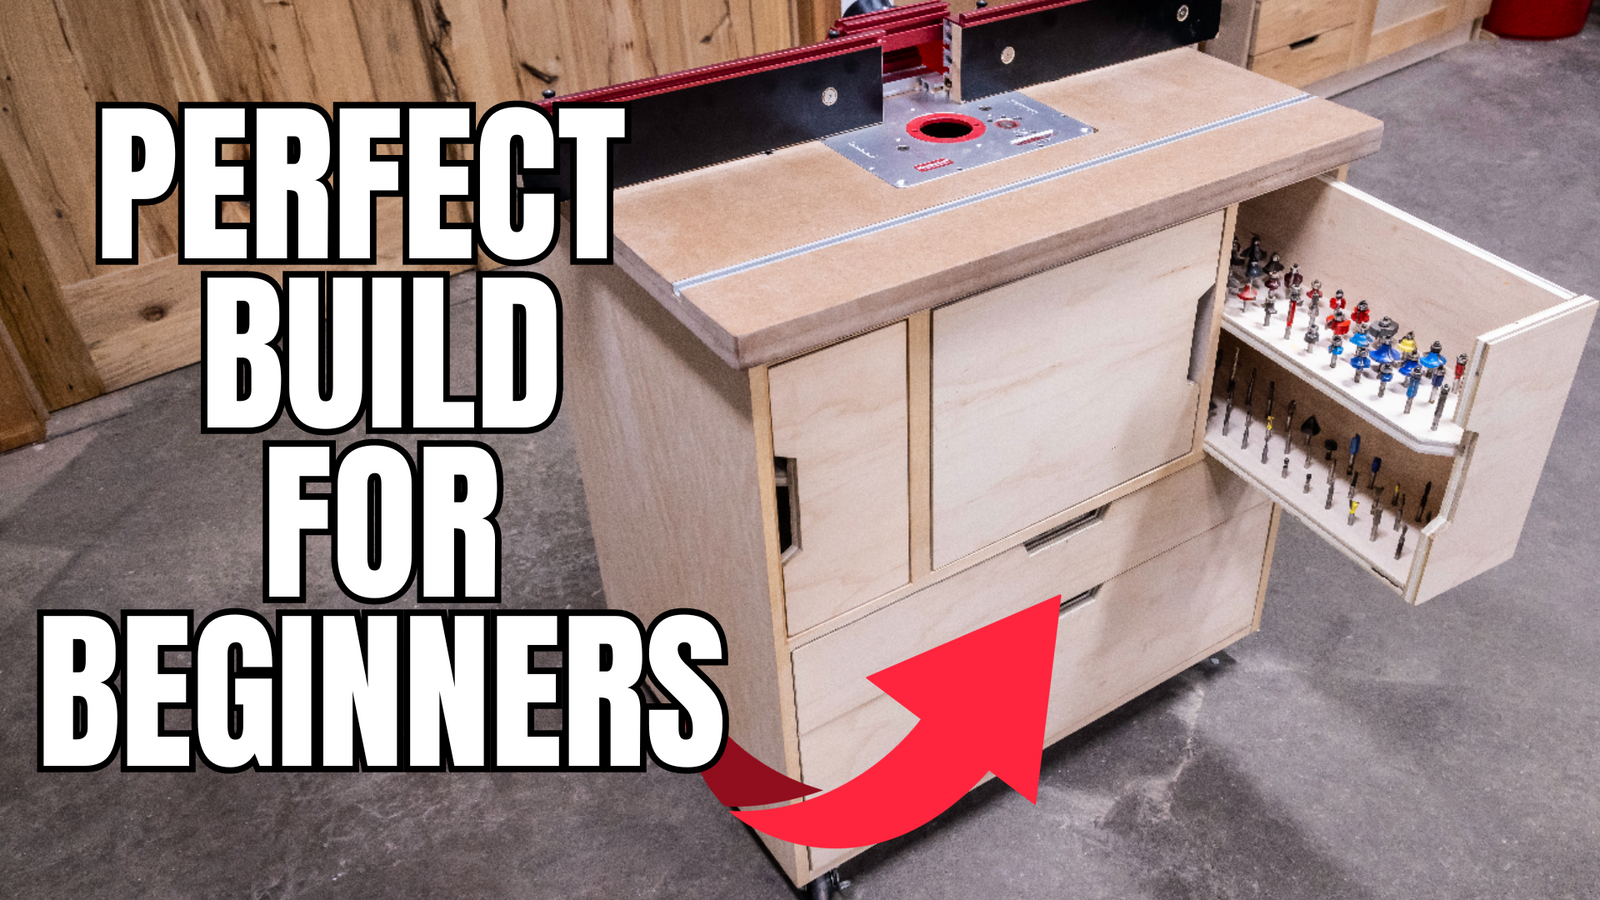 Why Building a Router Table is Perfect for Beginners